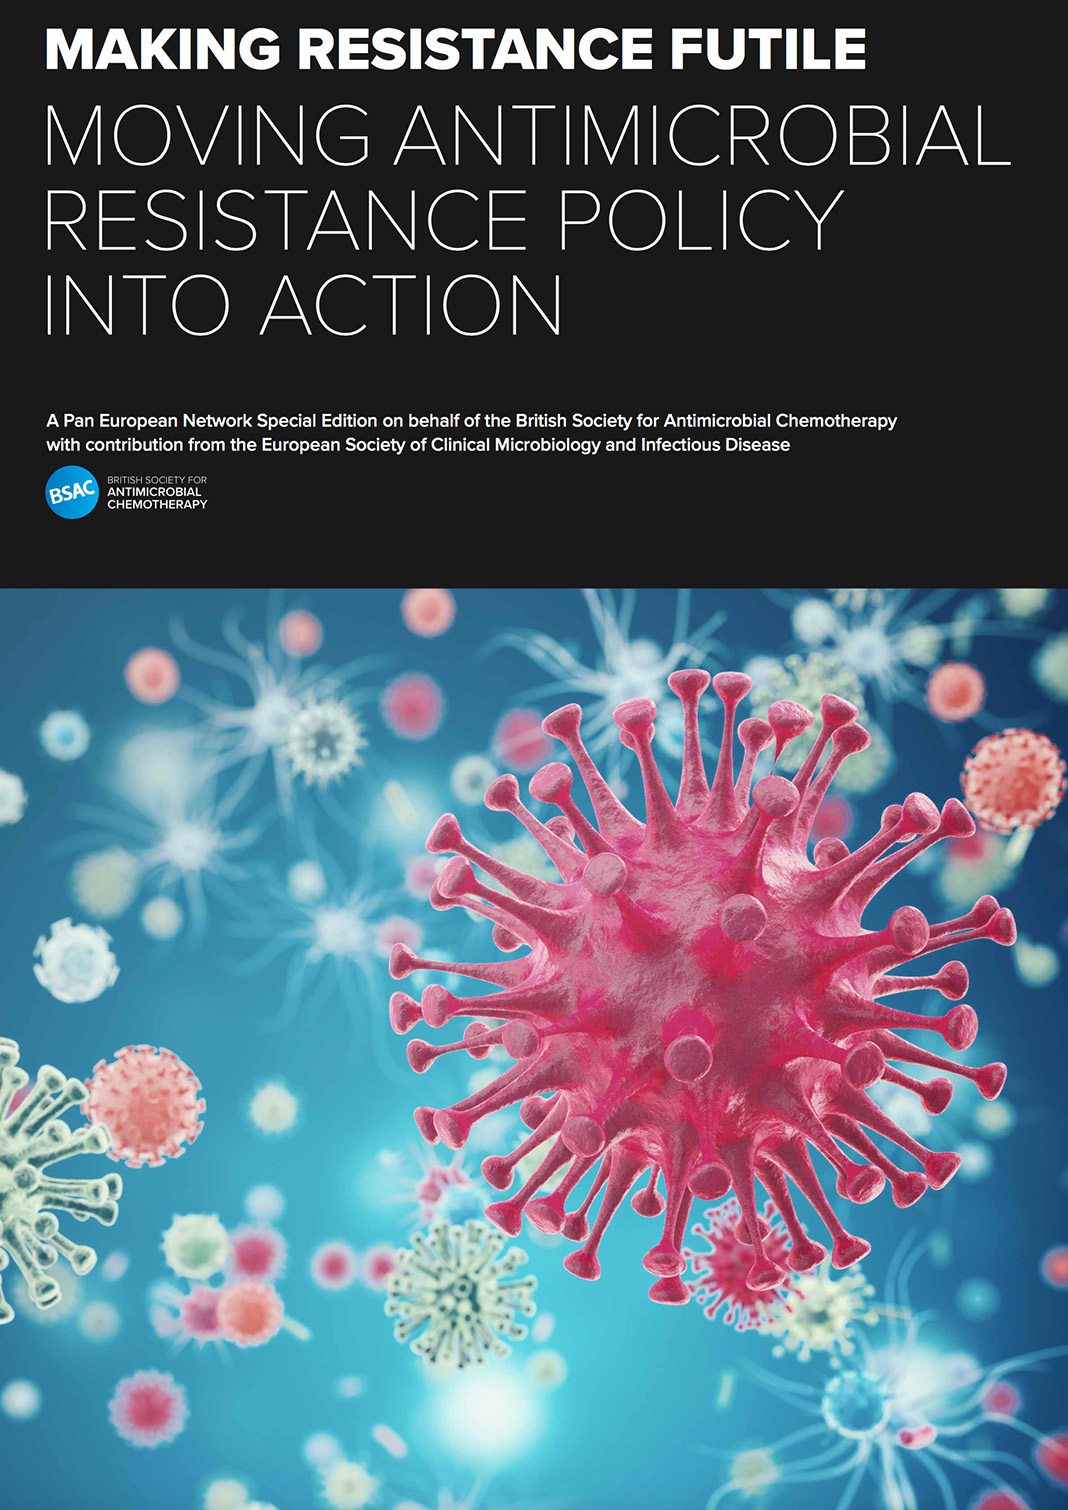 Moving AMR policy into action with BSAC